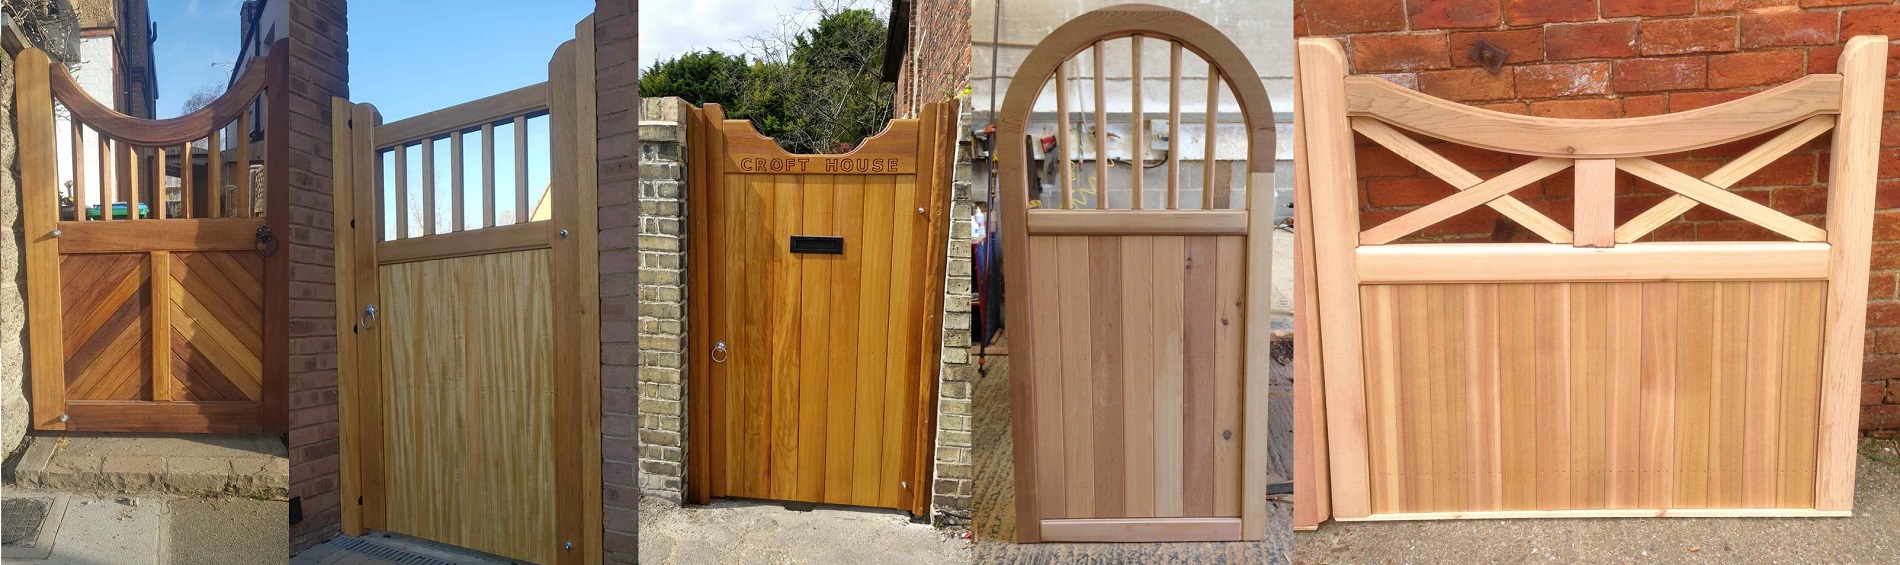 Examples of different hardwood gate designs 